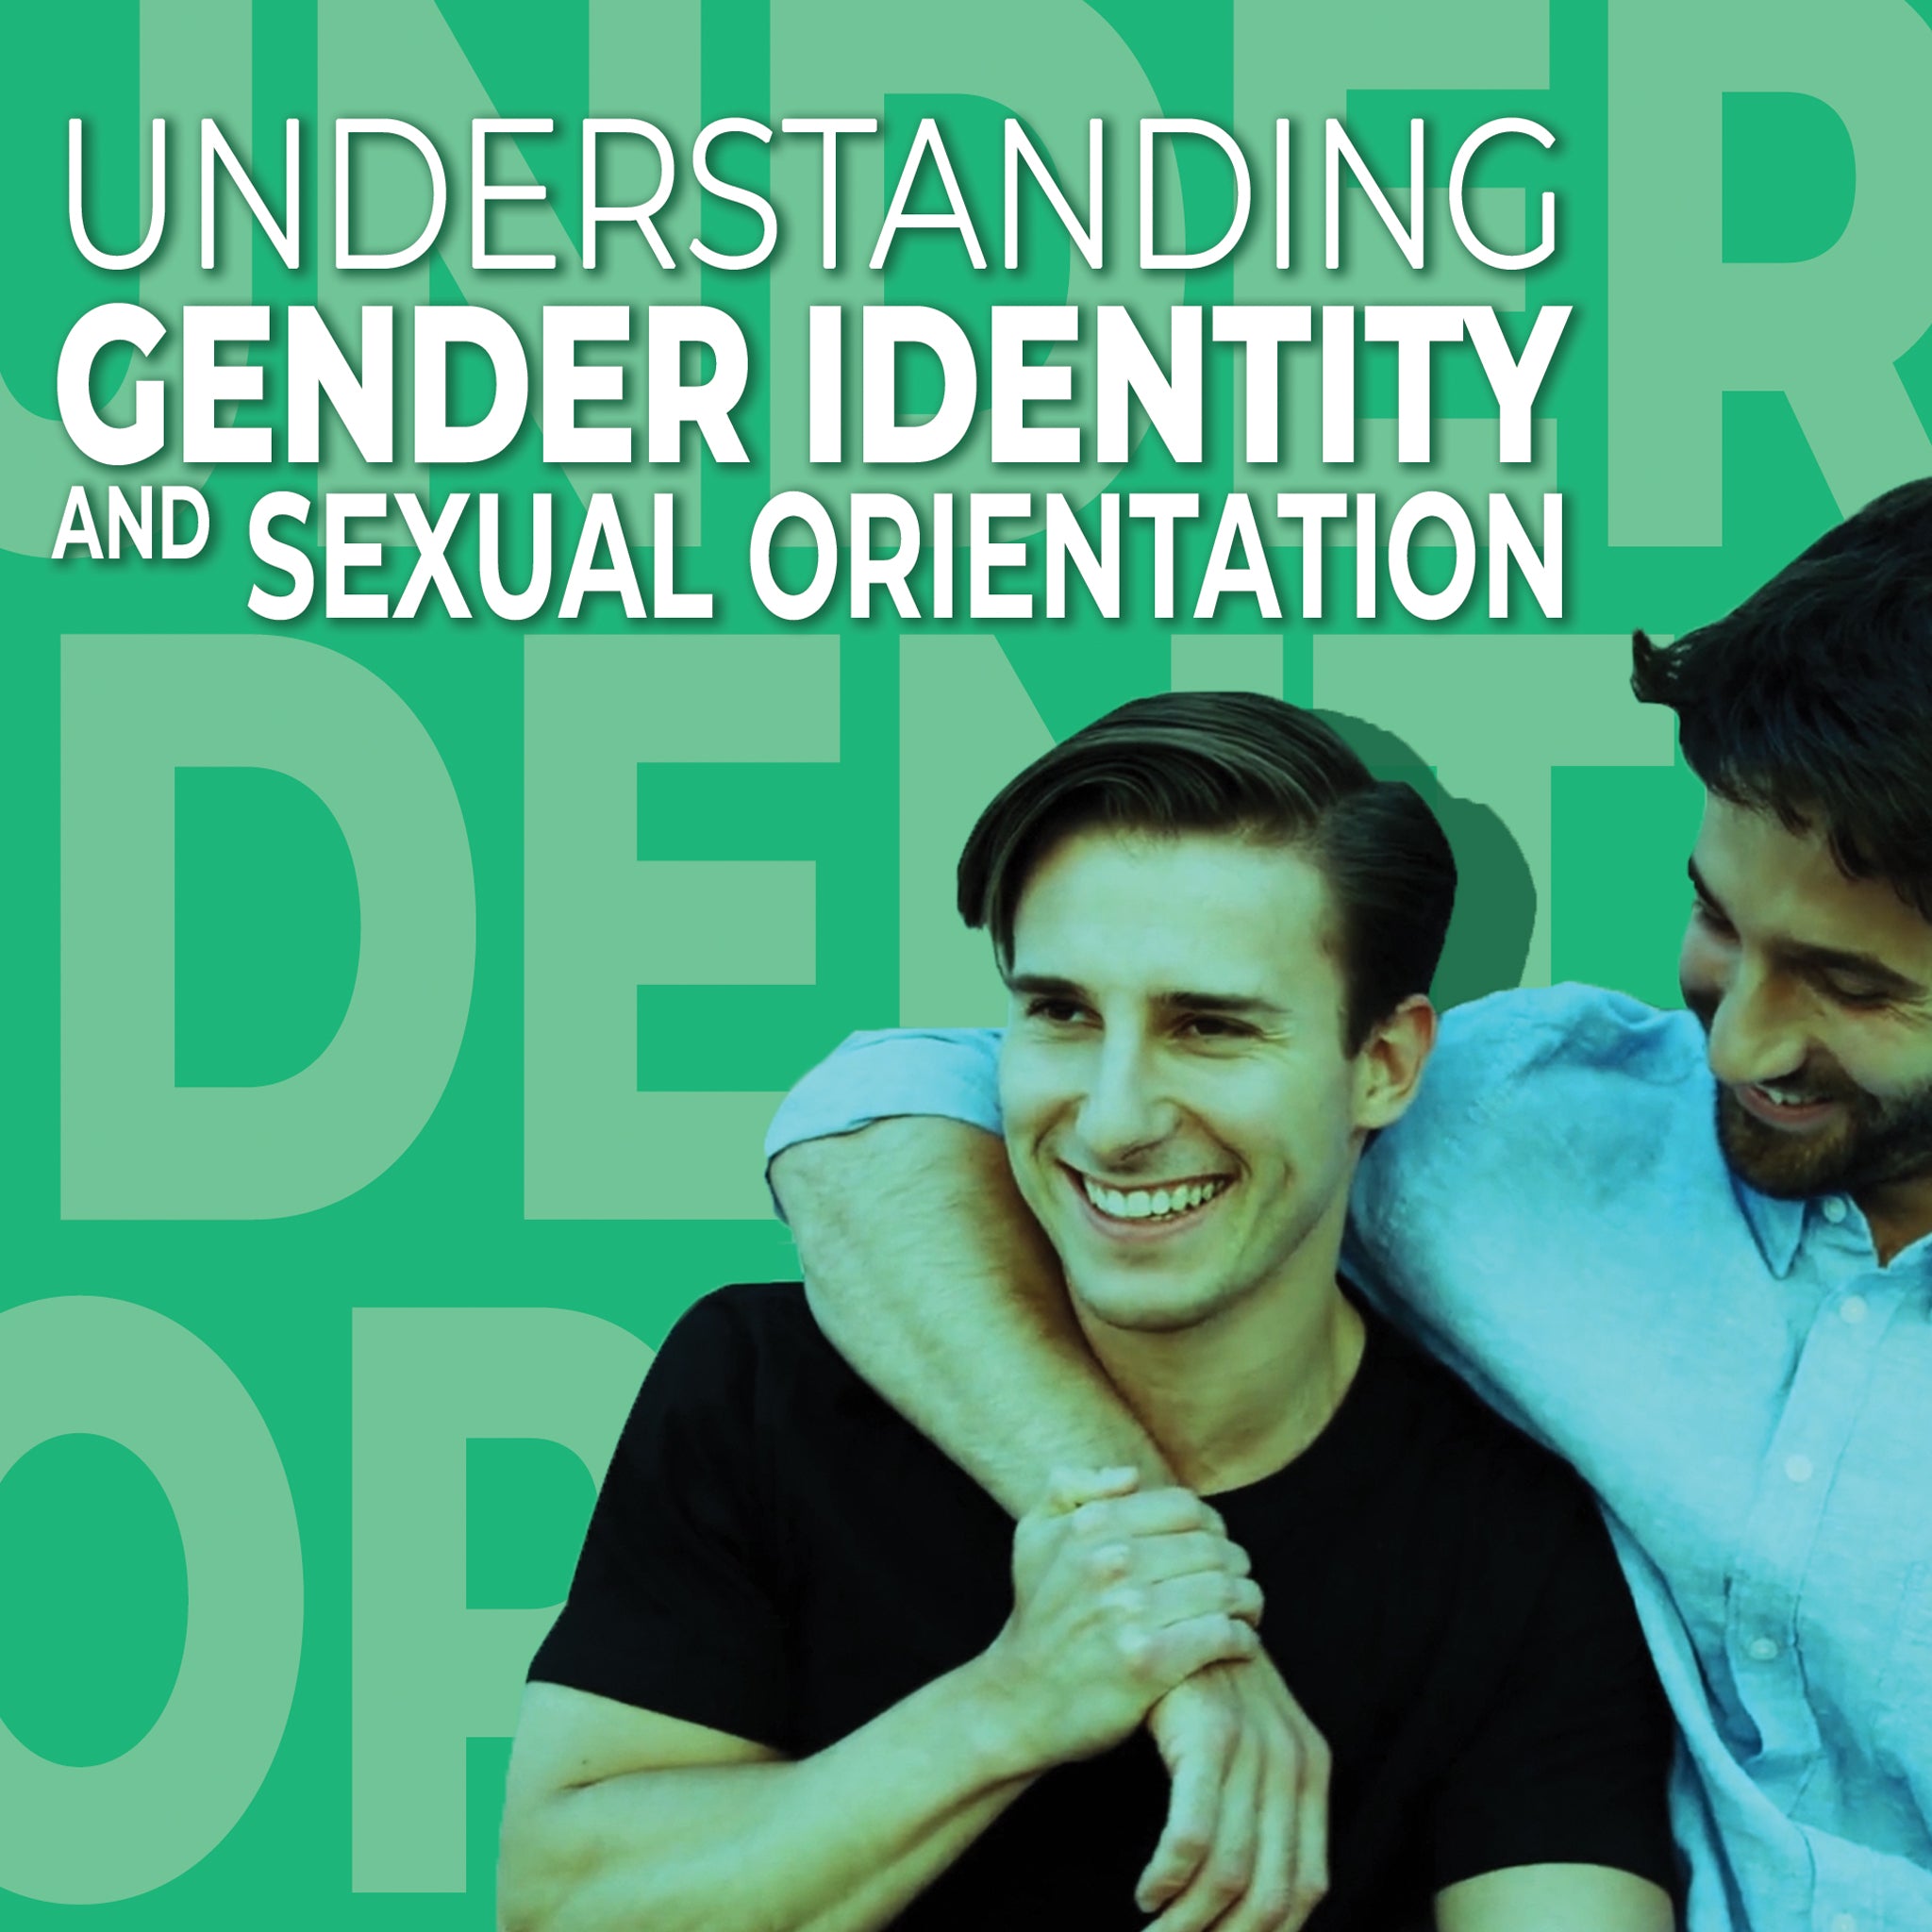 Building An Inclusive Workforce Gender Identity And Sexual Orientatio Moxie Training